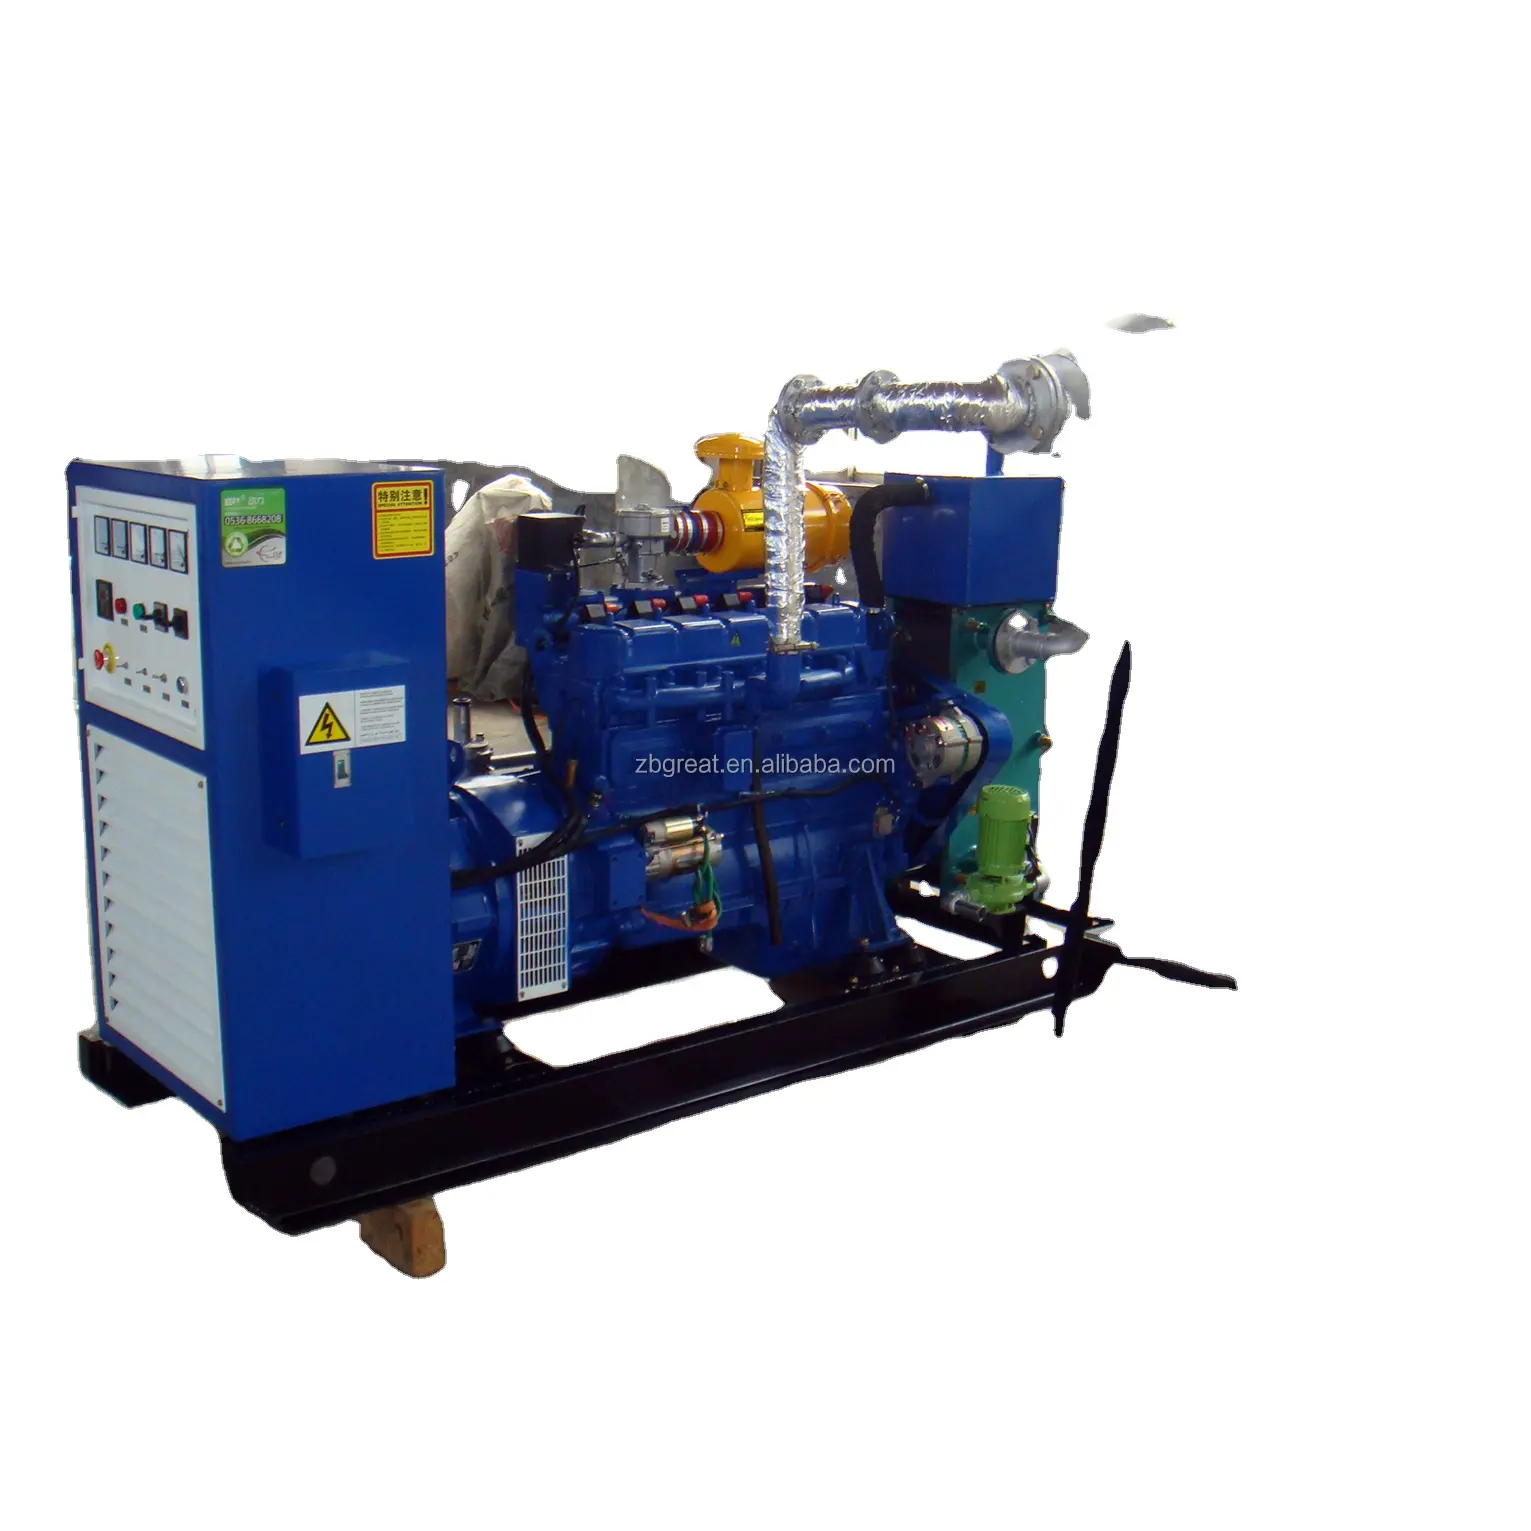 Most Popular Water Generator Professional Supplier With High Efficiency Best Price Turbine Hydro Generator Manufacturer